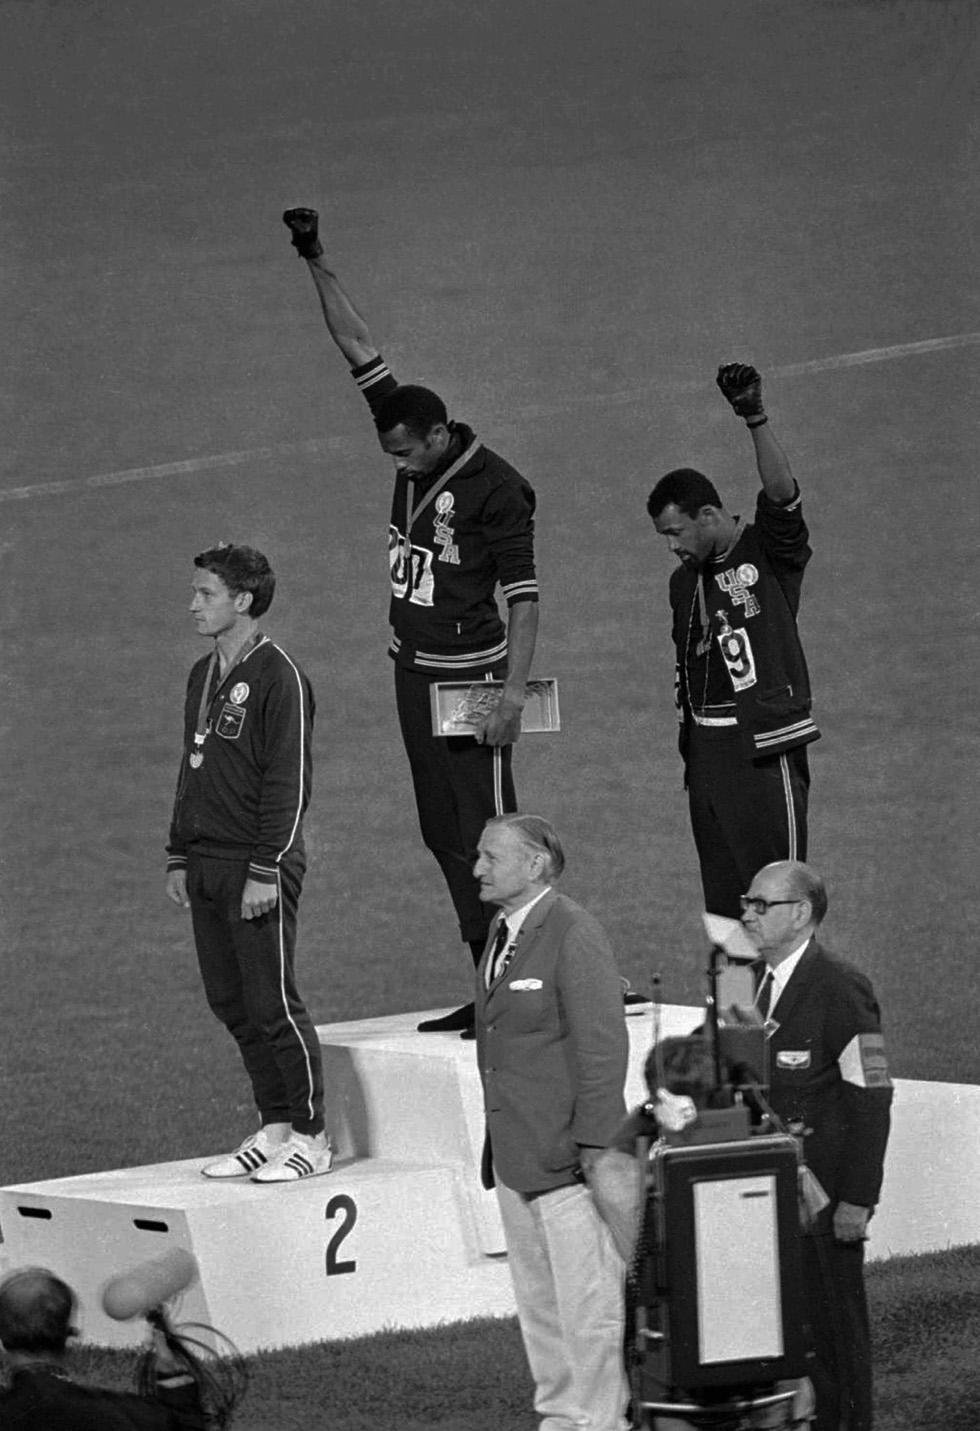 John Carlos and Tommie Smith raise their fists in protest at the 1968 Olympic Games